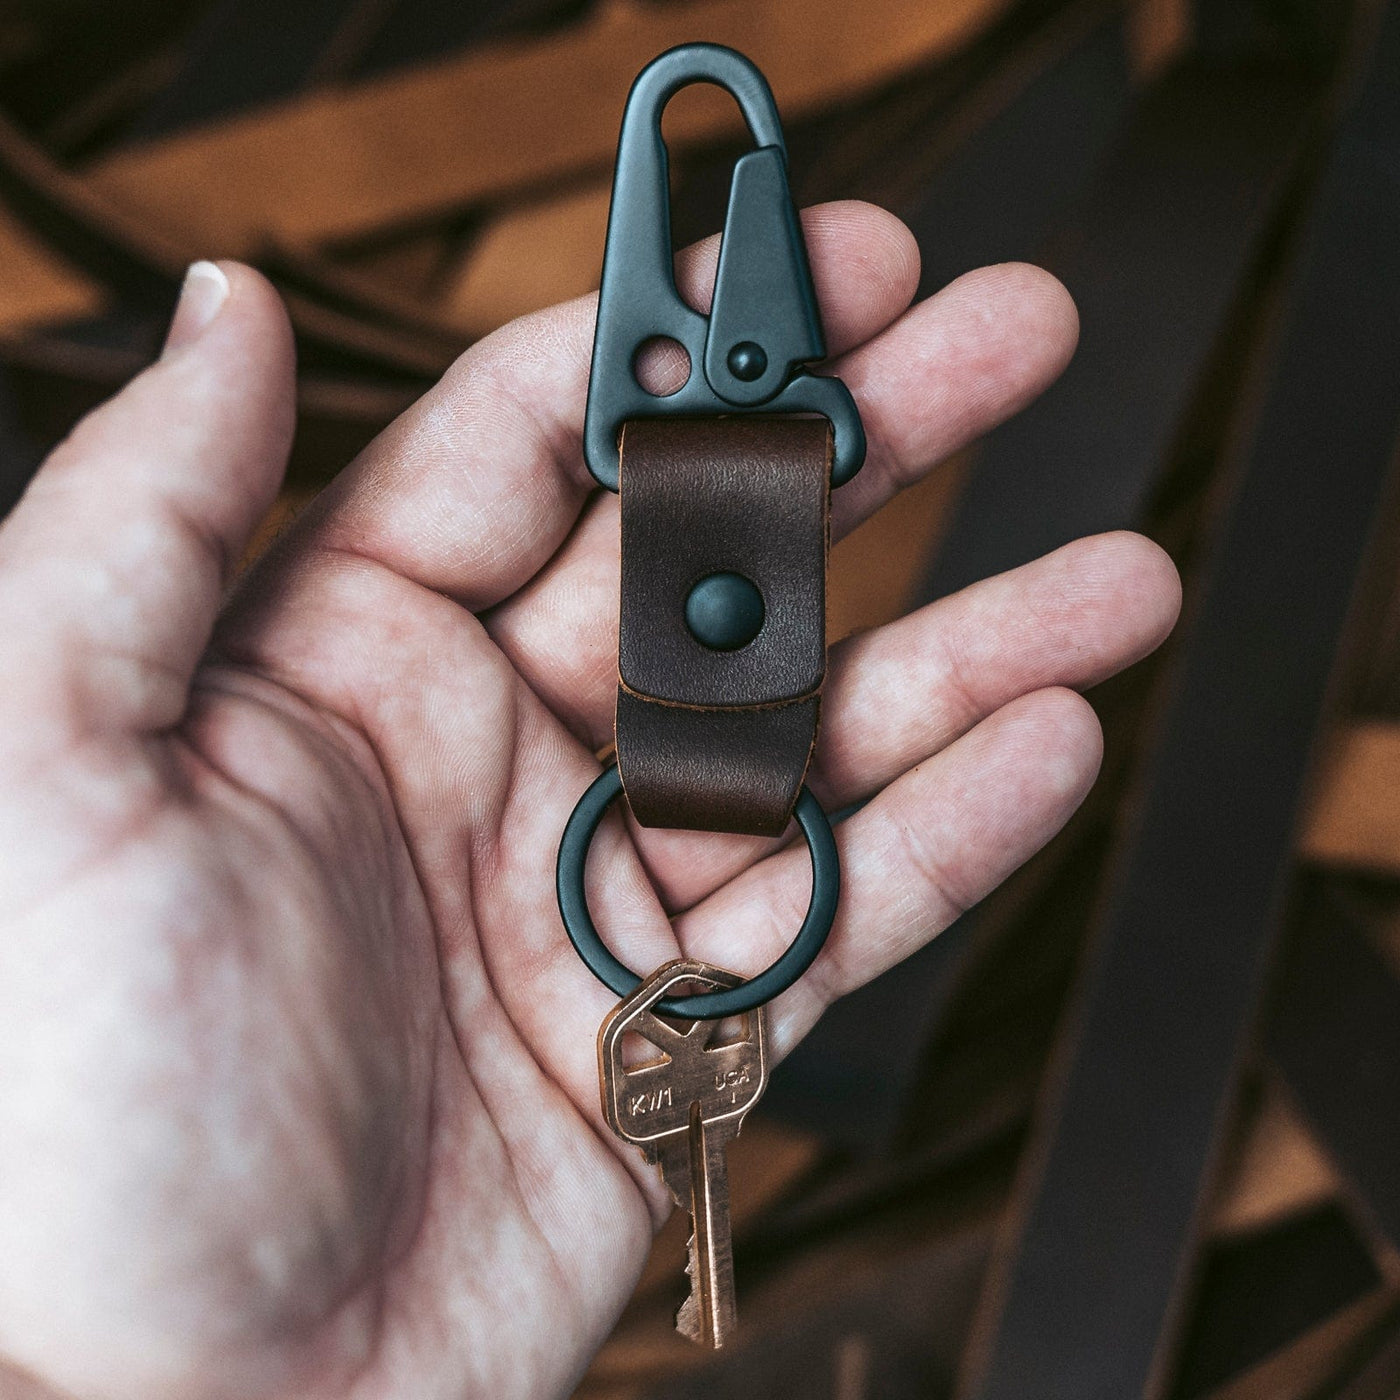 Leather Clip Keychain - Heritage Brown Popov Leather